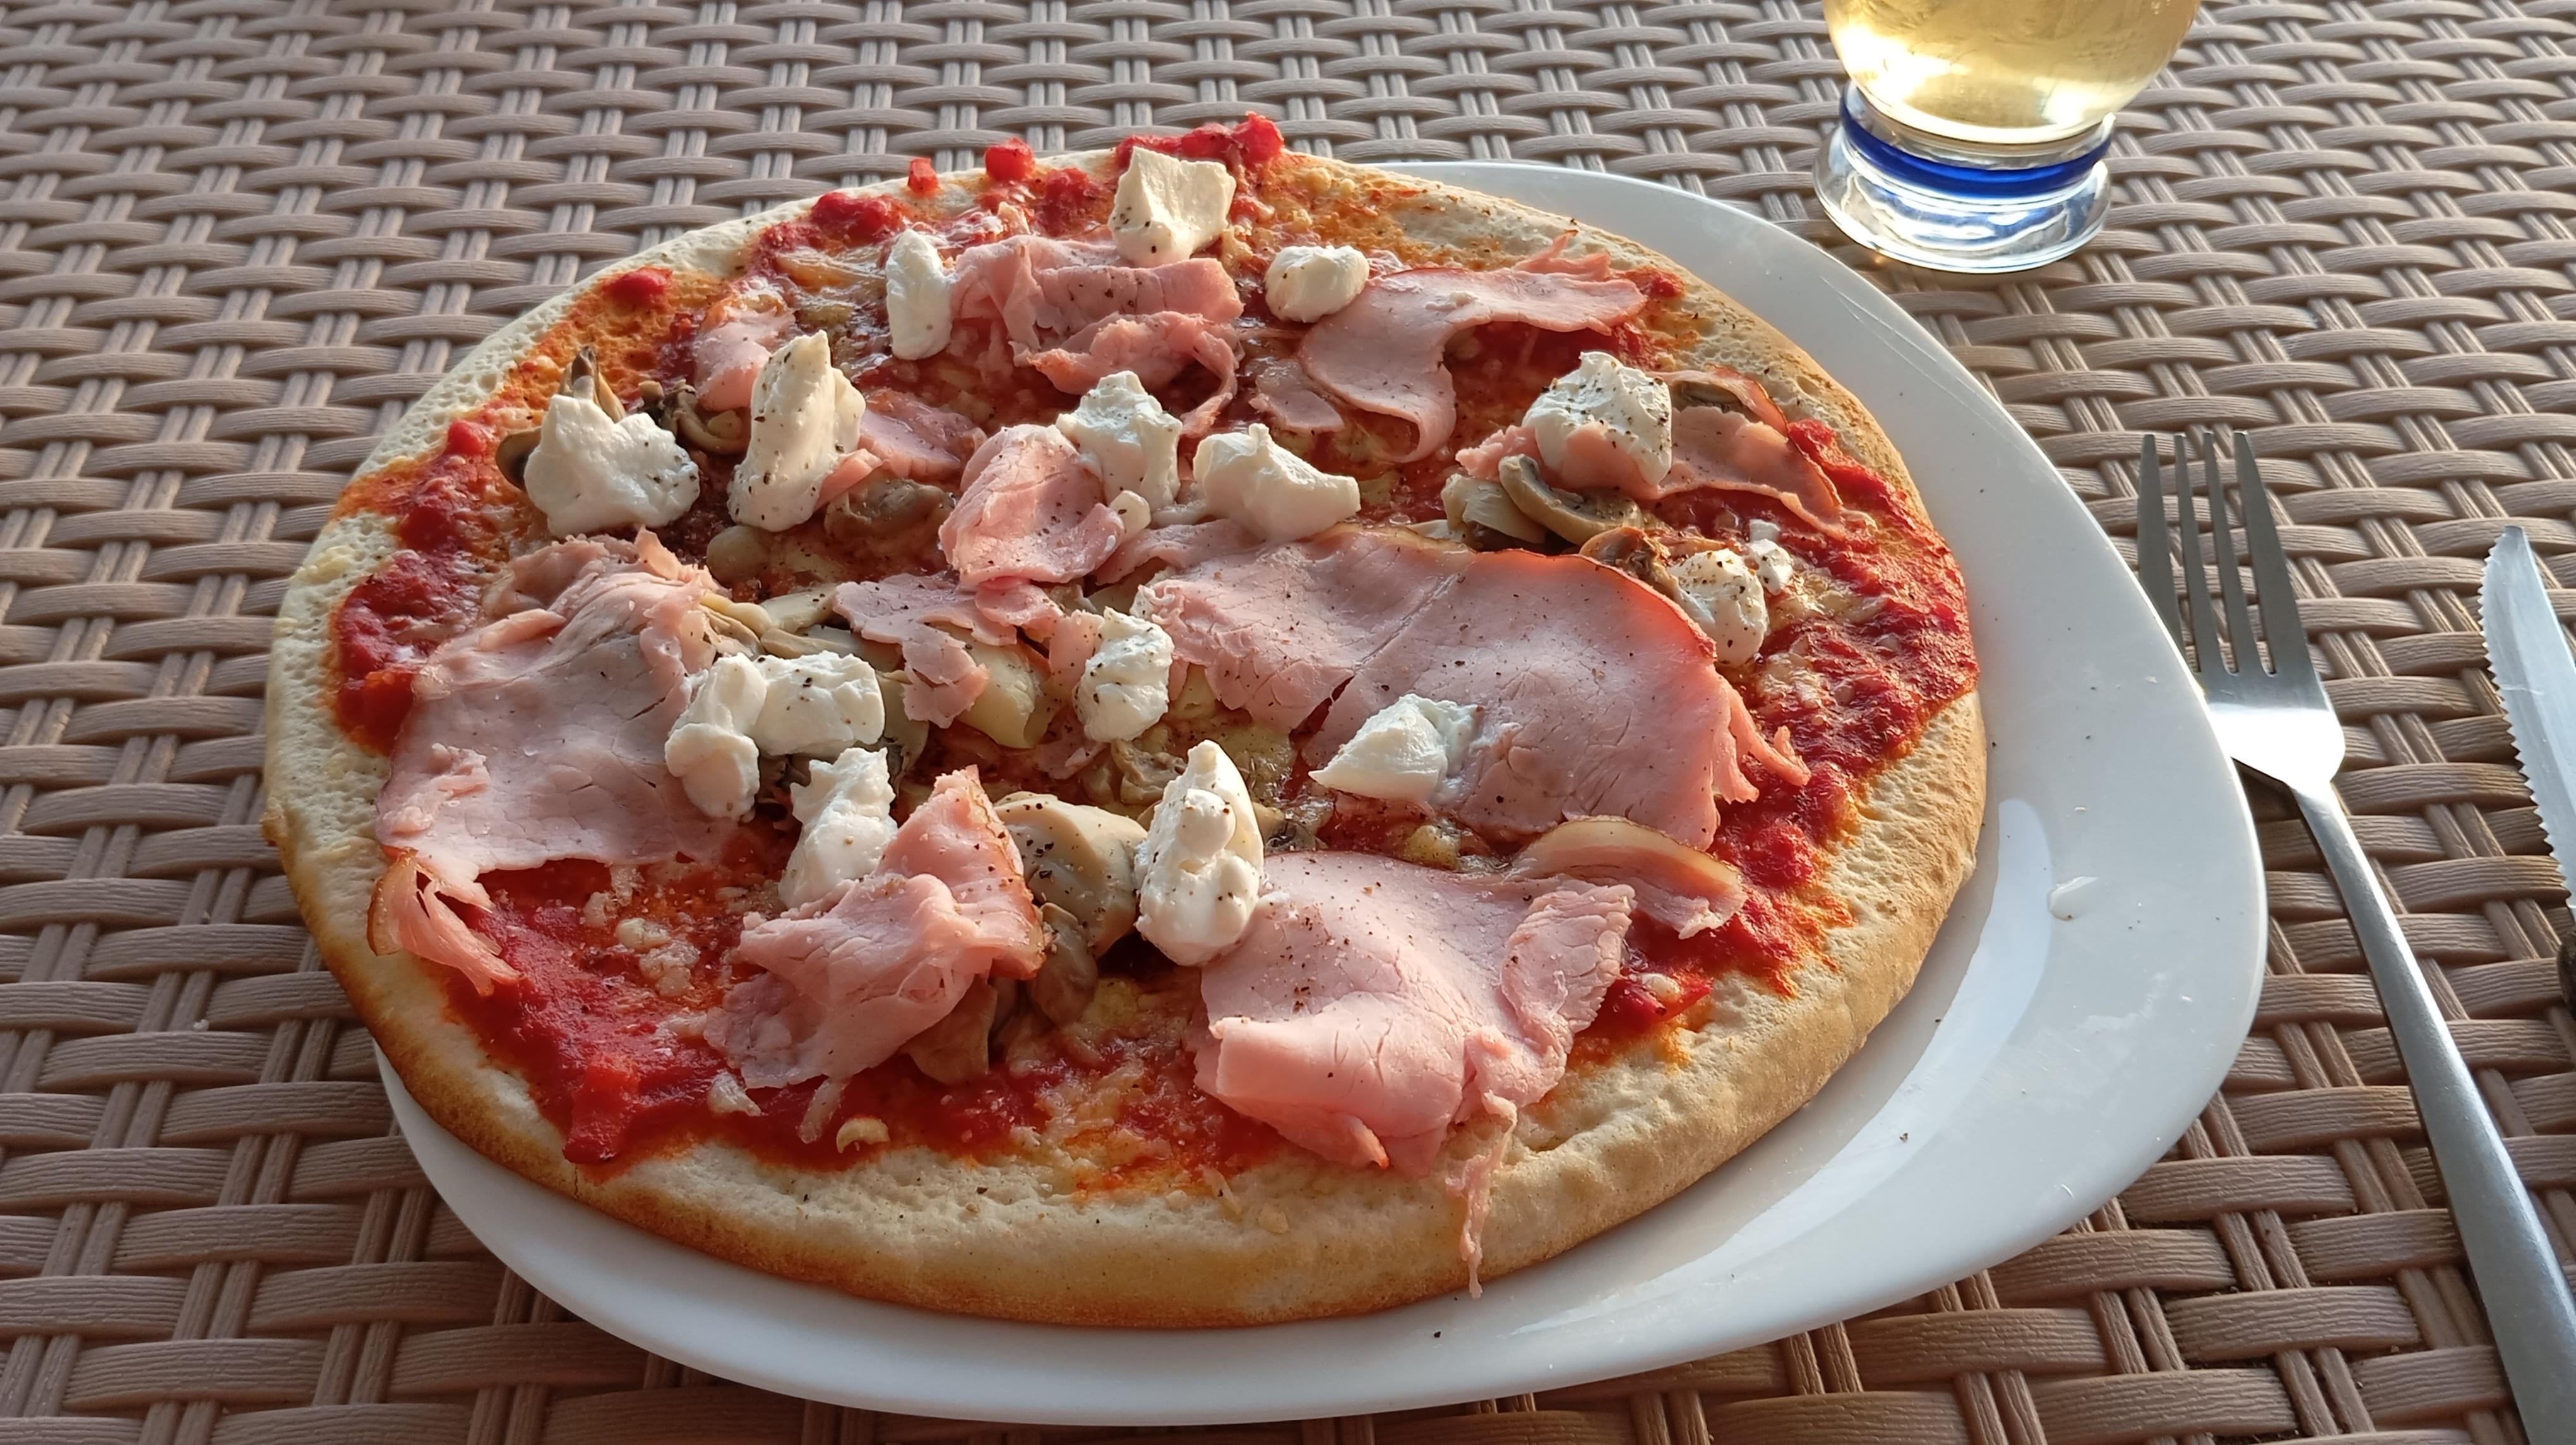 Pizza prosciutto e funghi (improvised) - Dining and Cooking